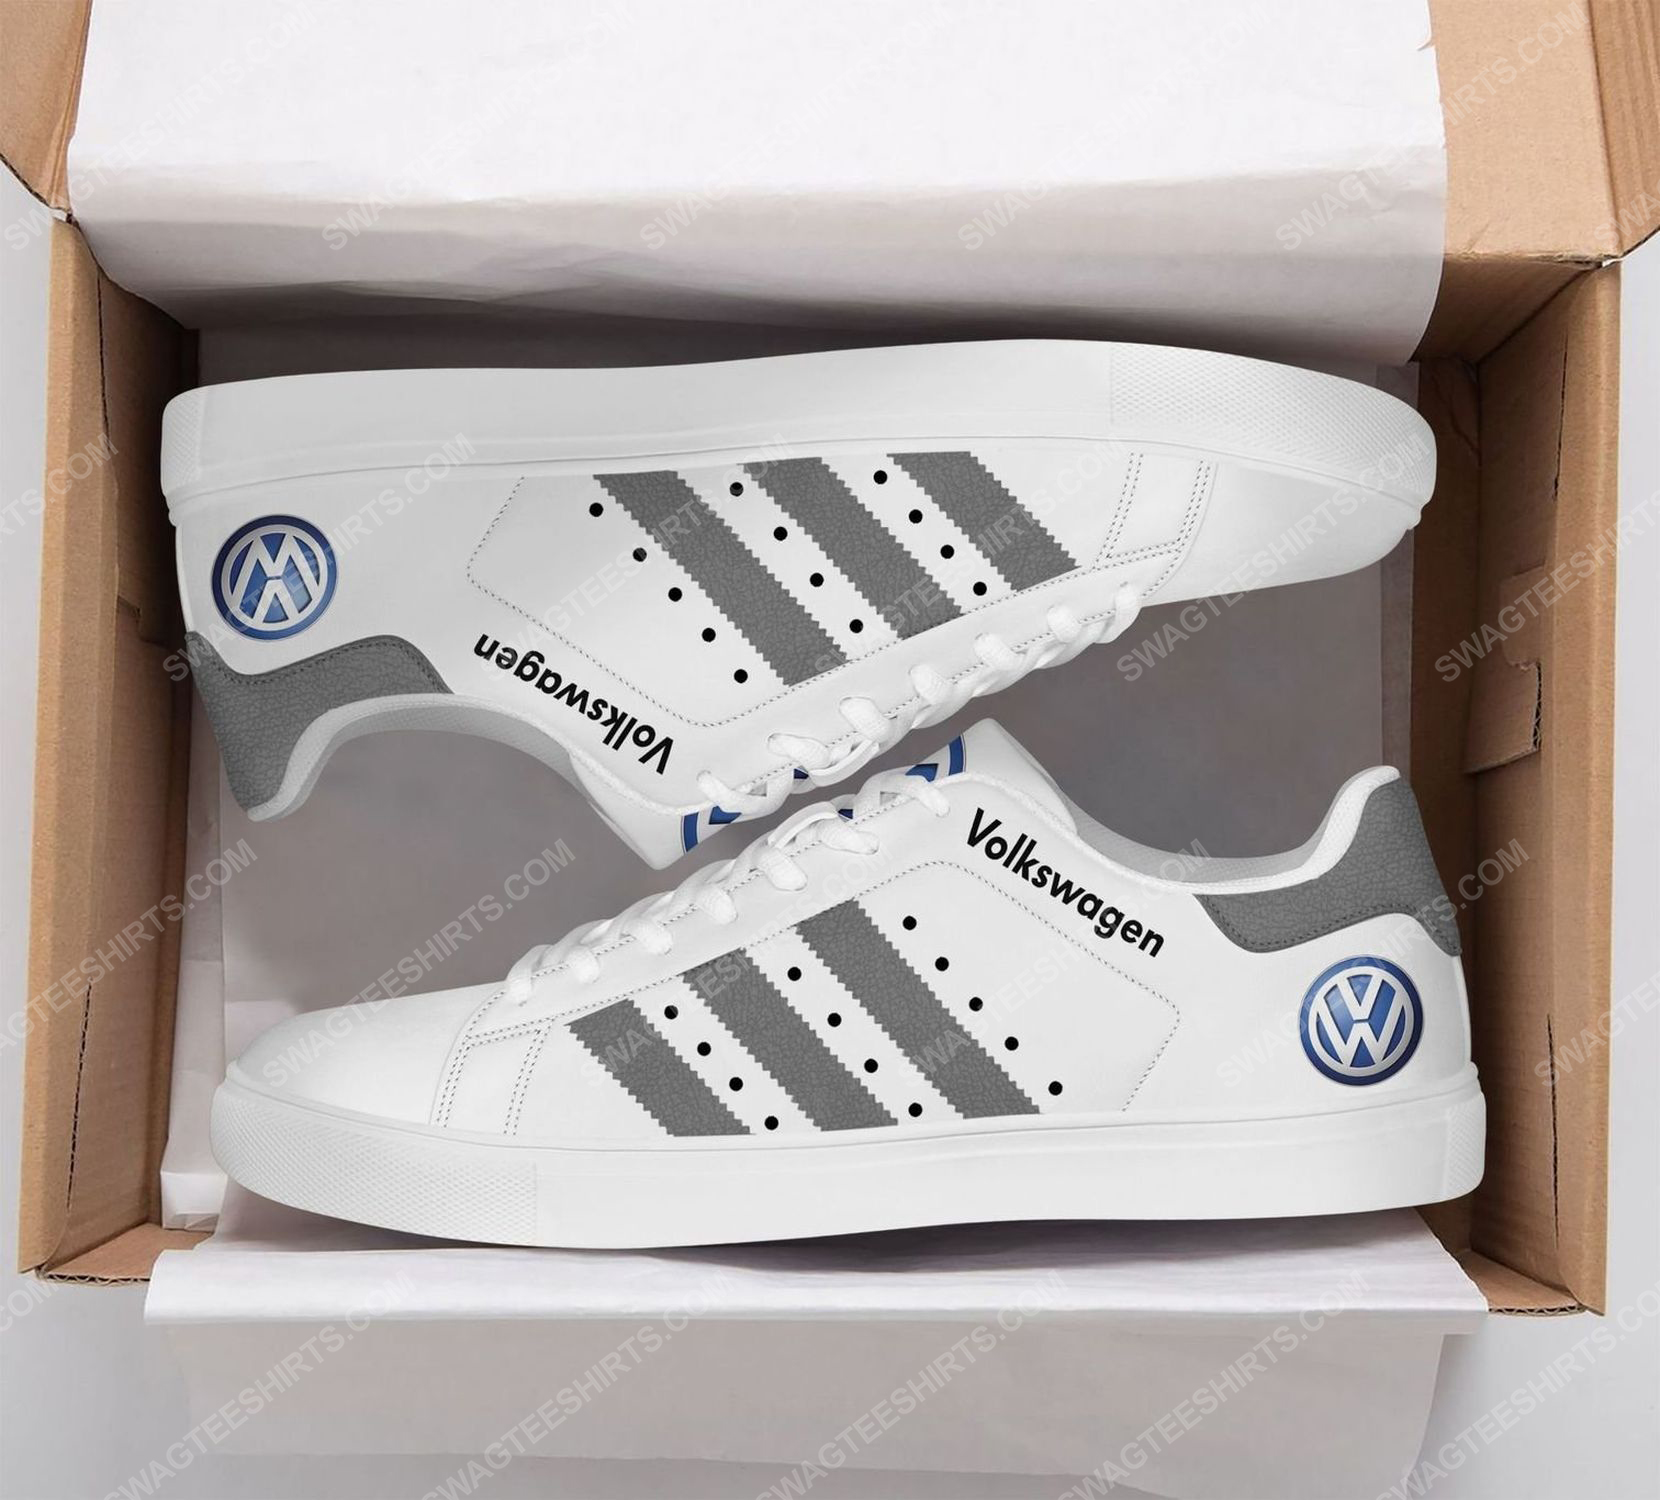 The volkswagen version grey stan smith shoes 2